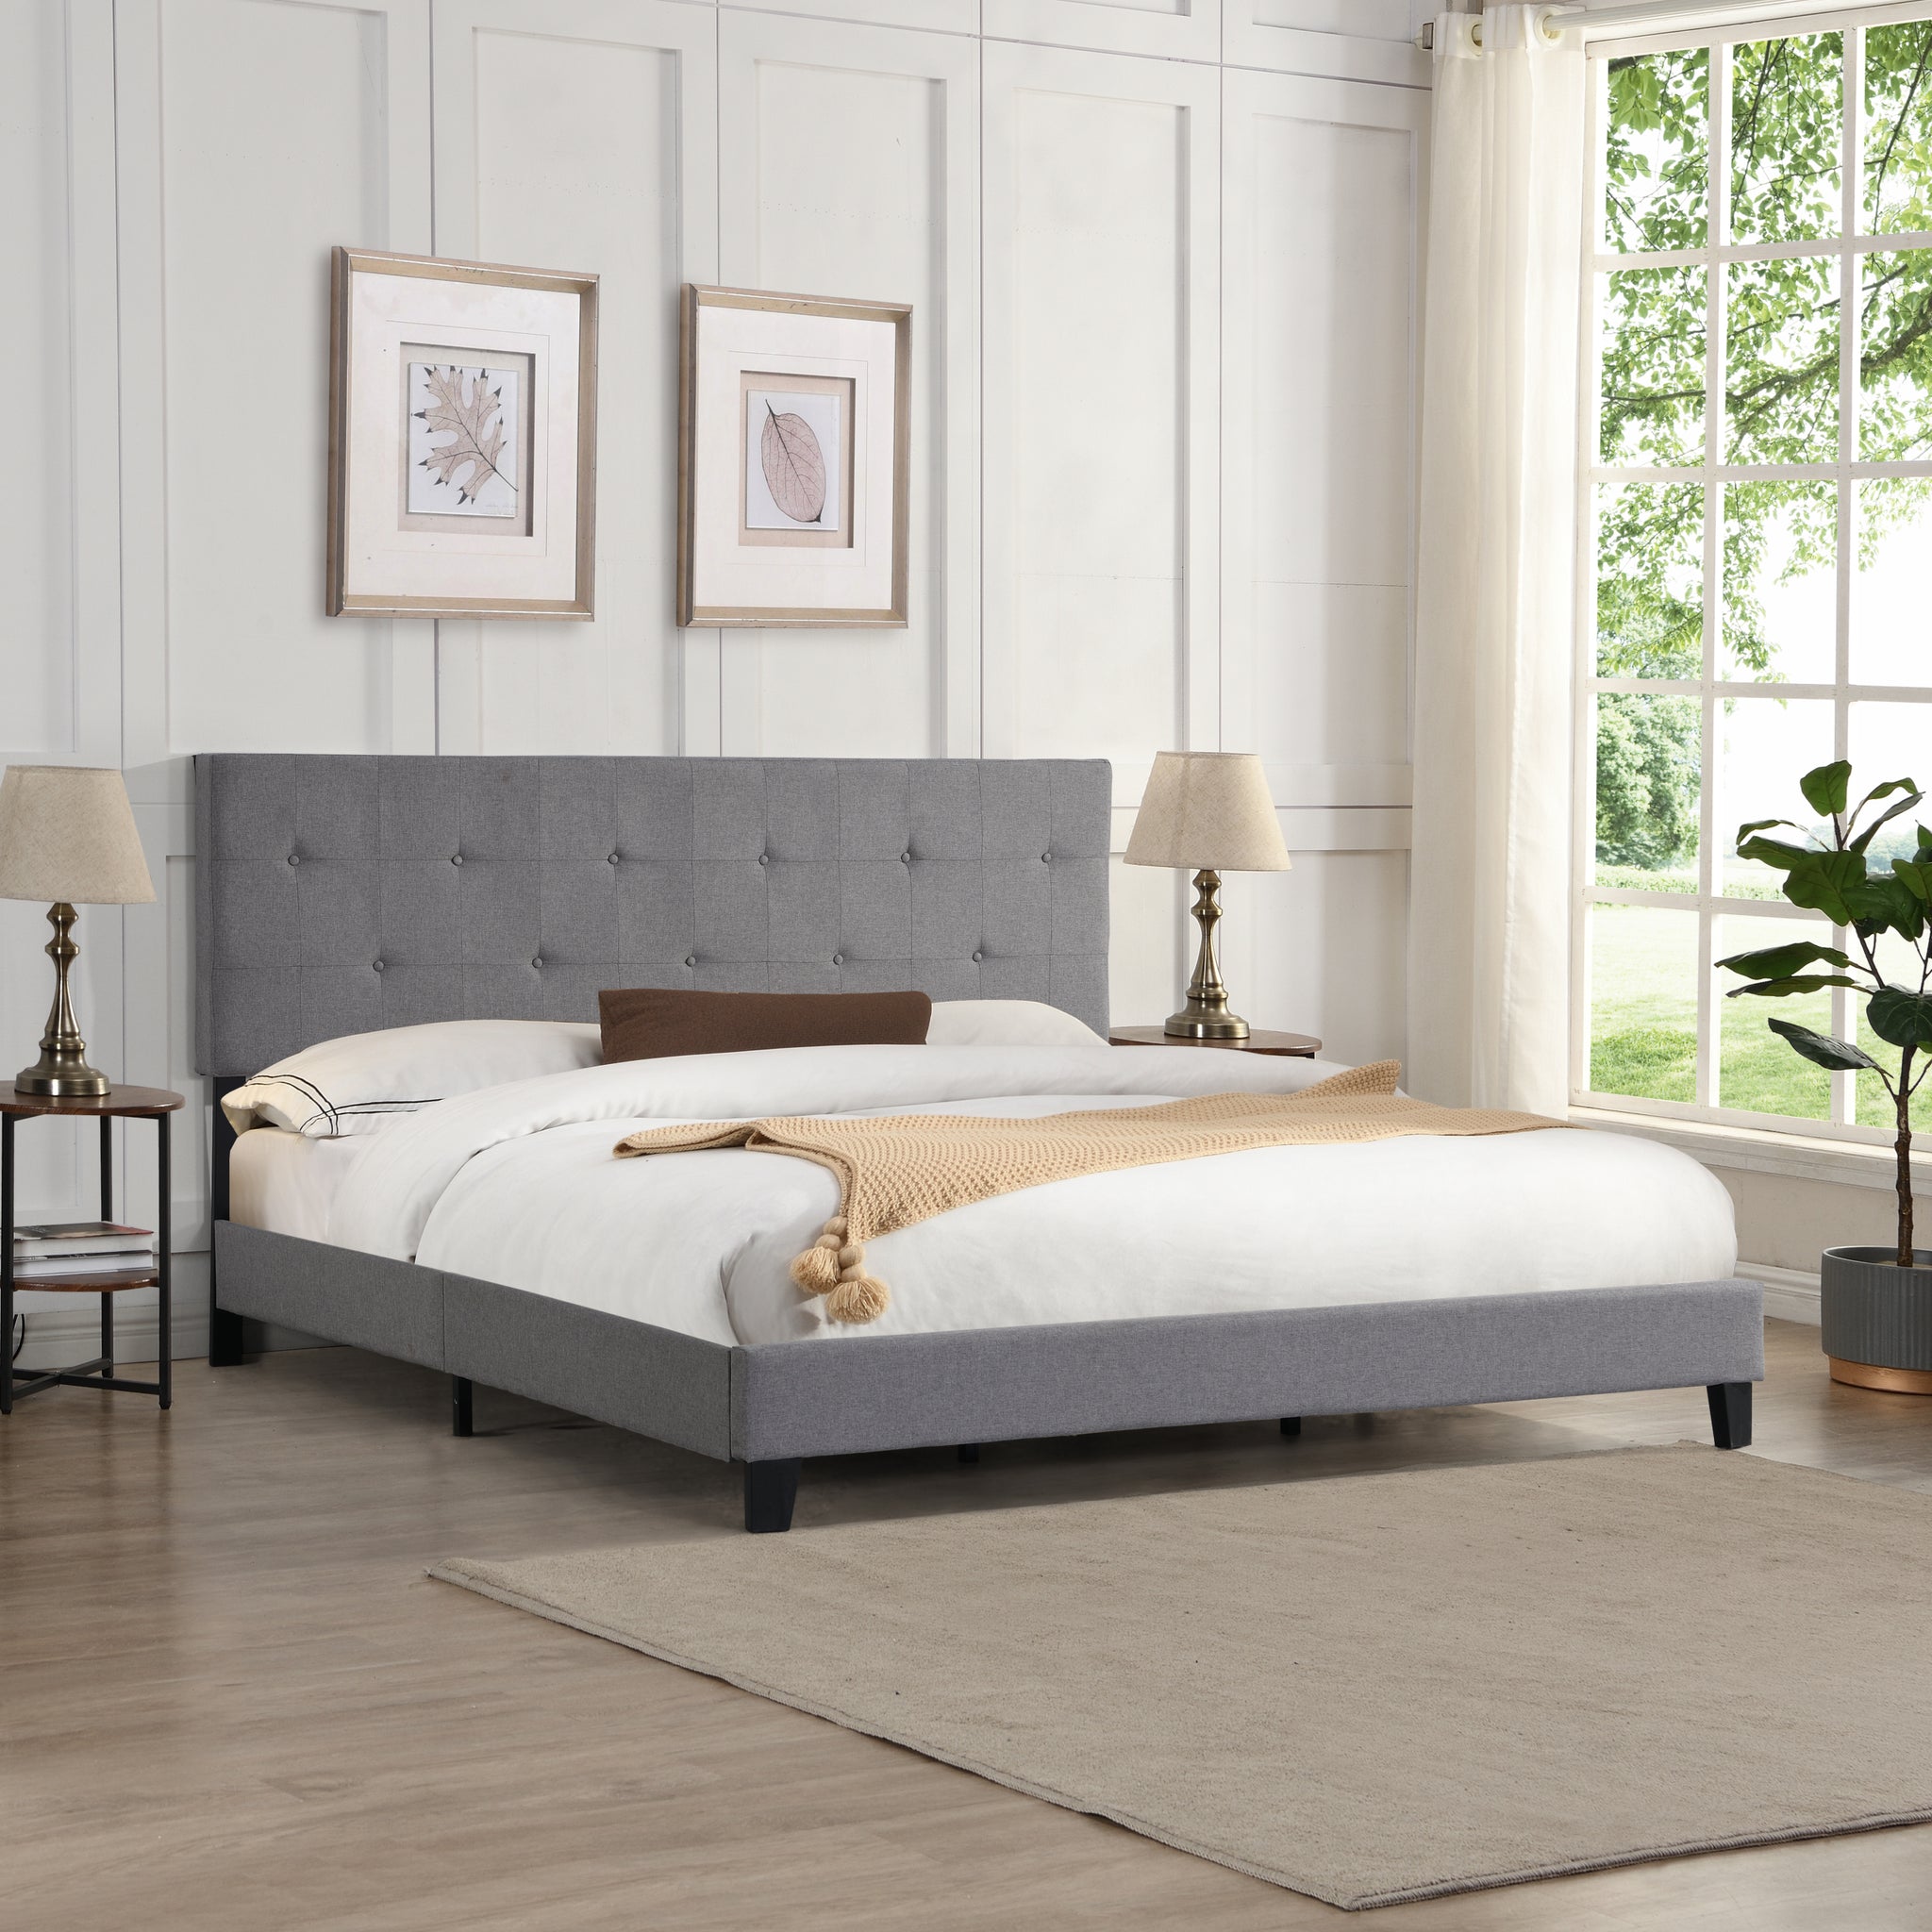 King Size Upholstered Platform Bed Frame with Button grey-fabric